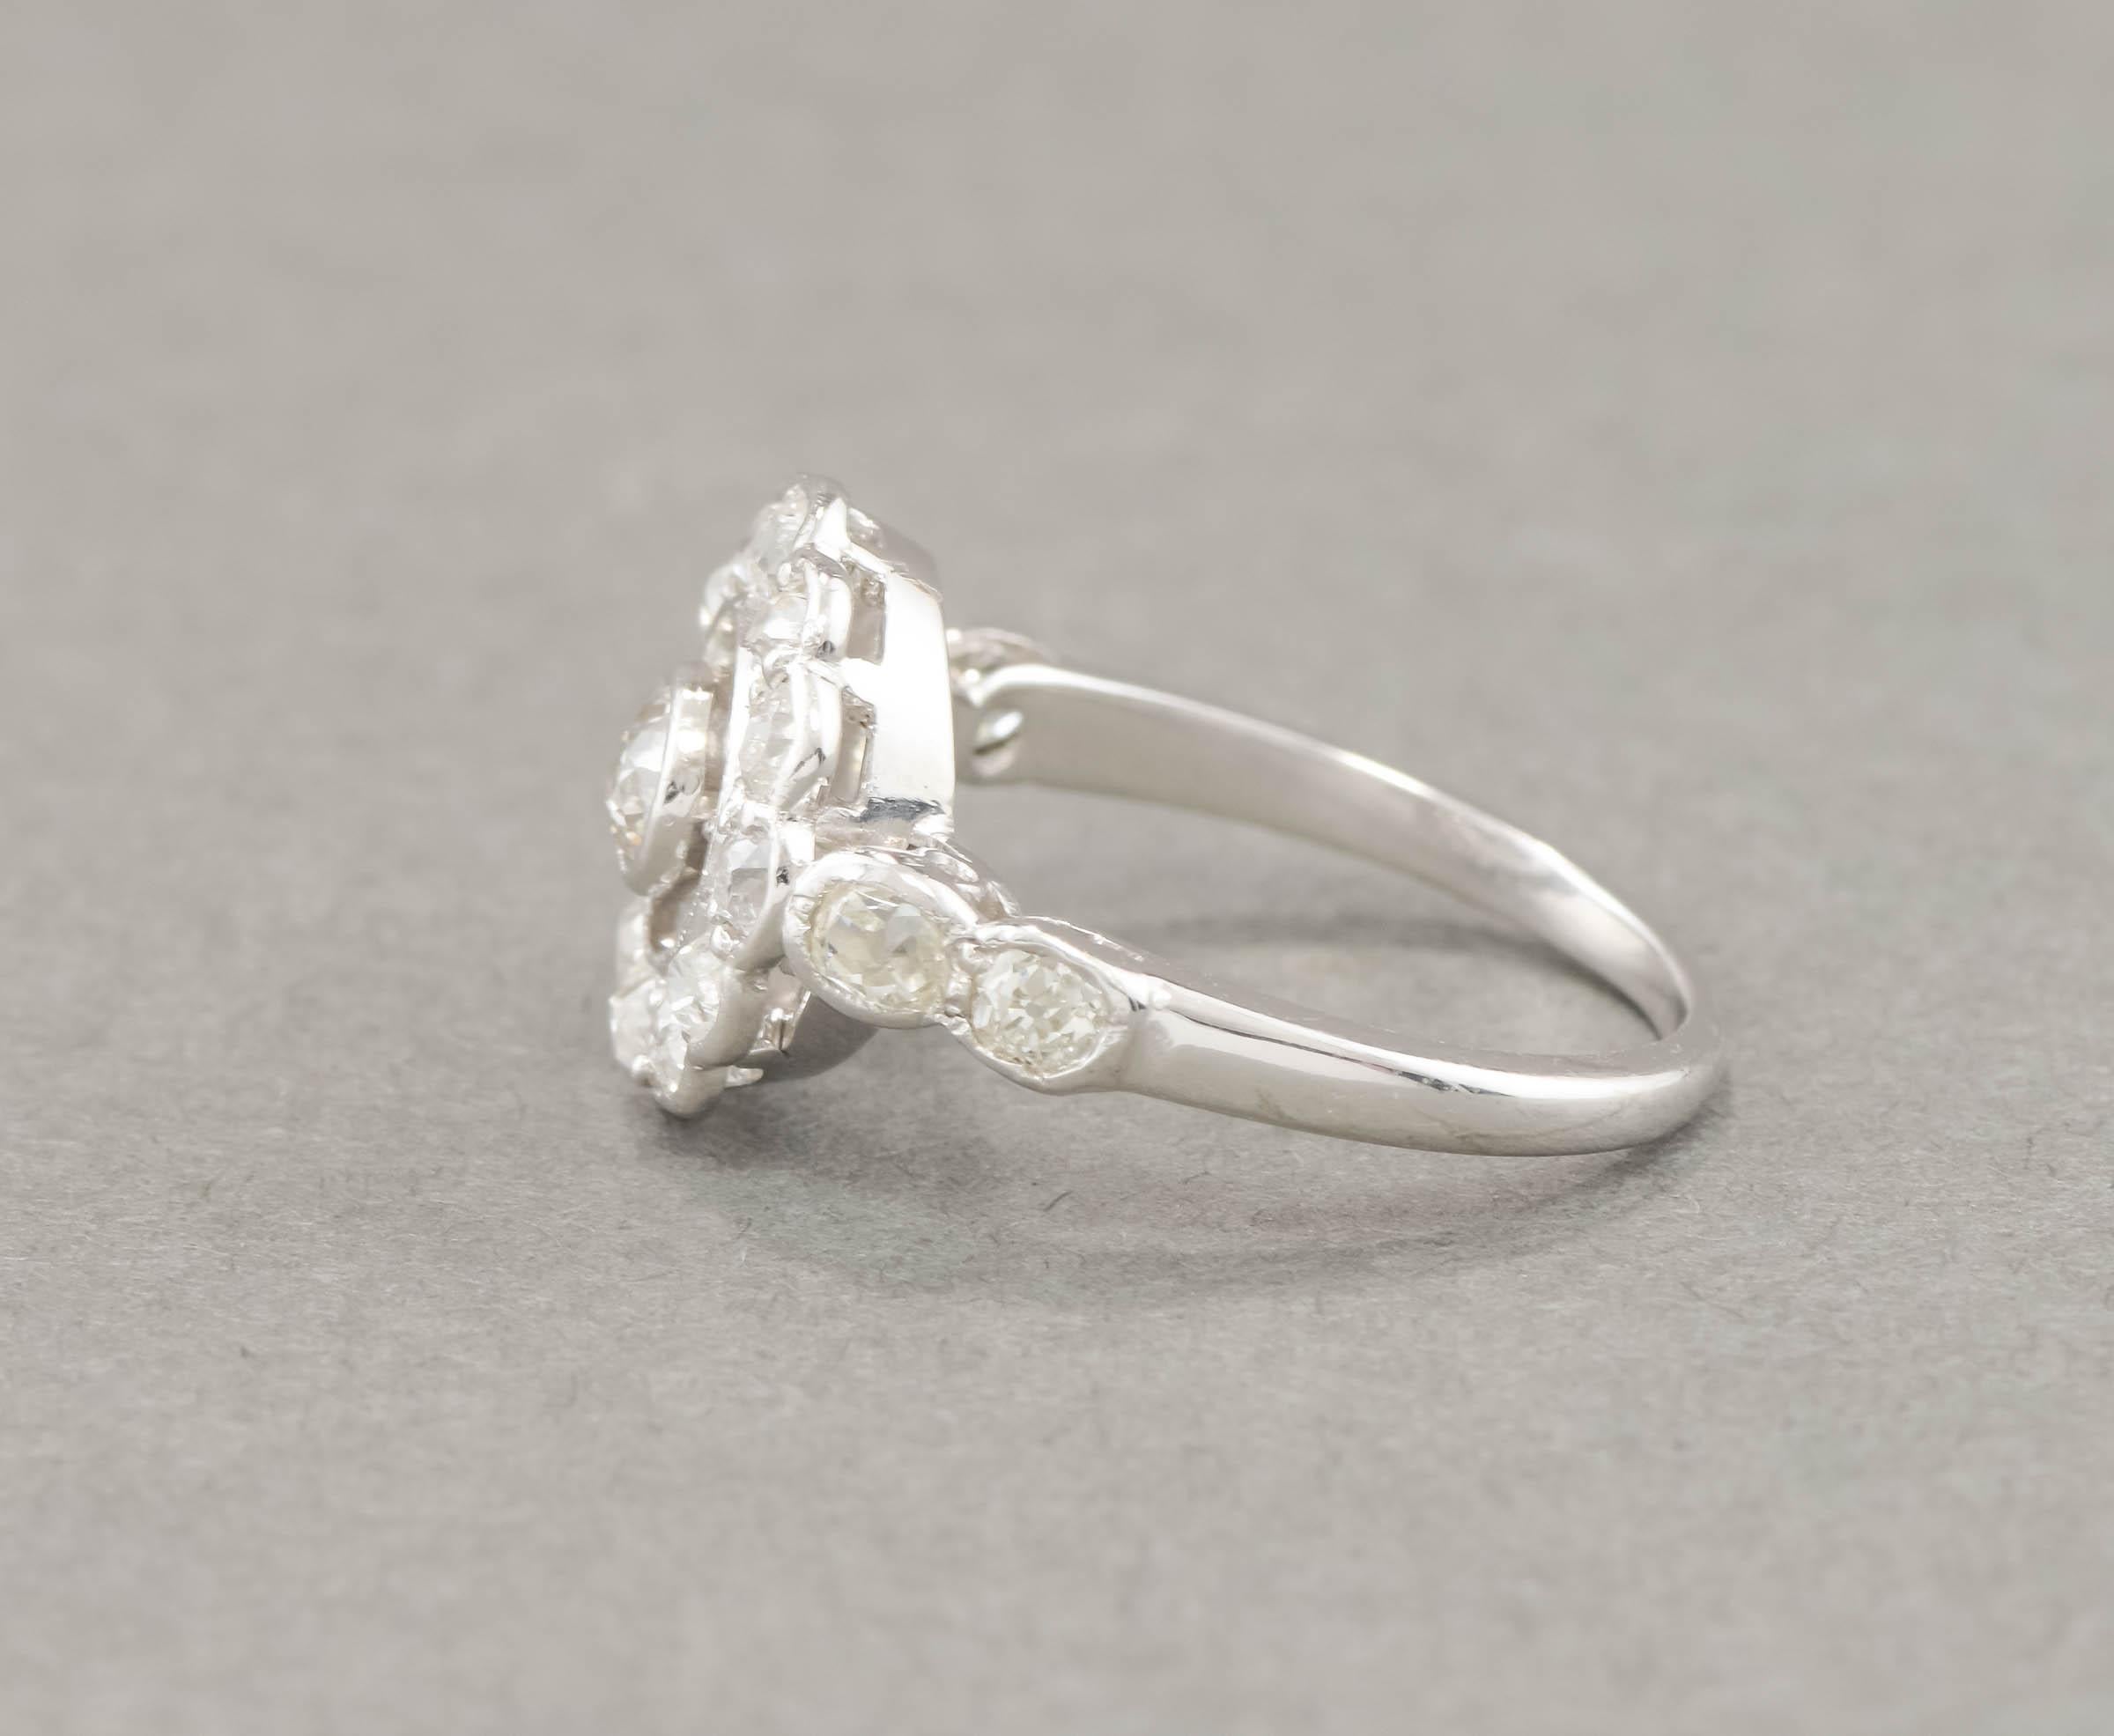 1930's Art Deco Diamond Target Halo Engagement Ring with Appraisals In Fair Condition For Sale In Danvers, MA